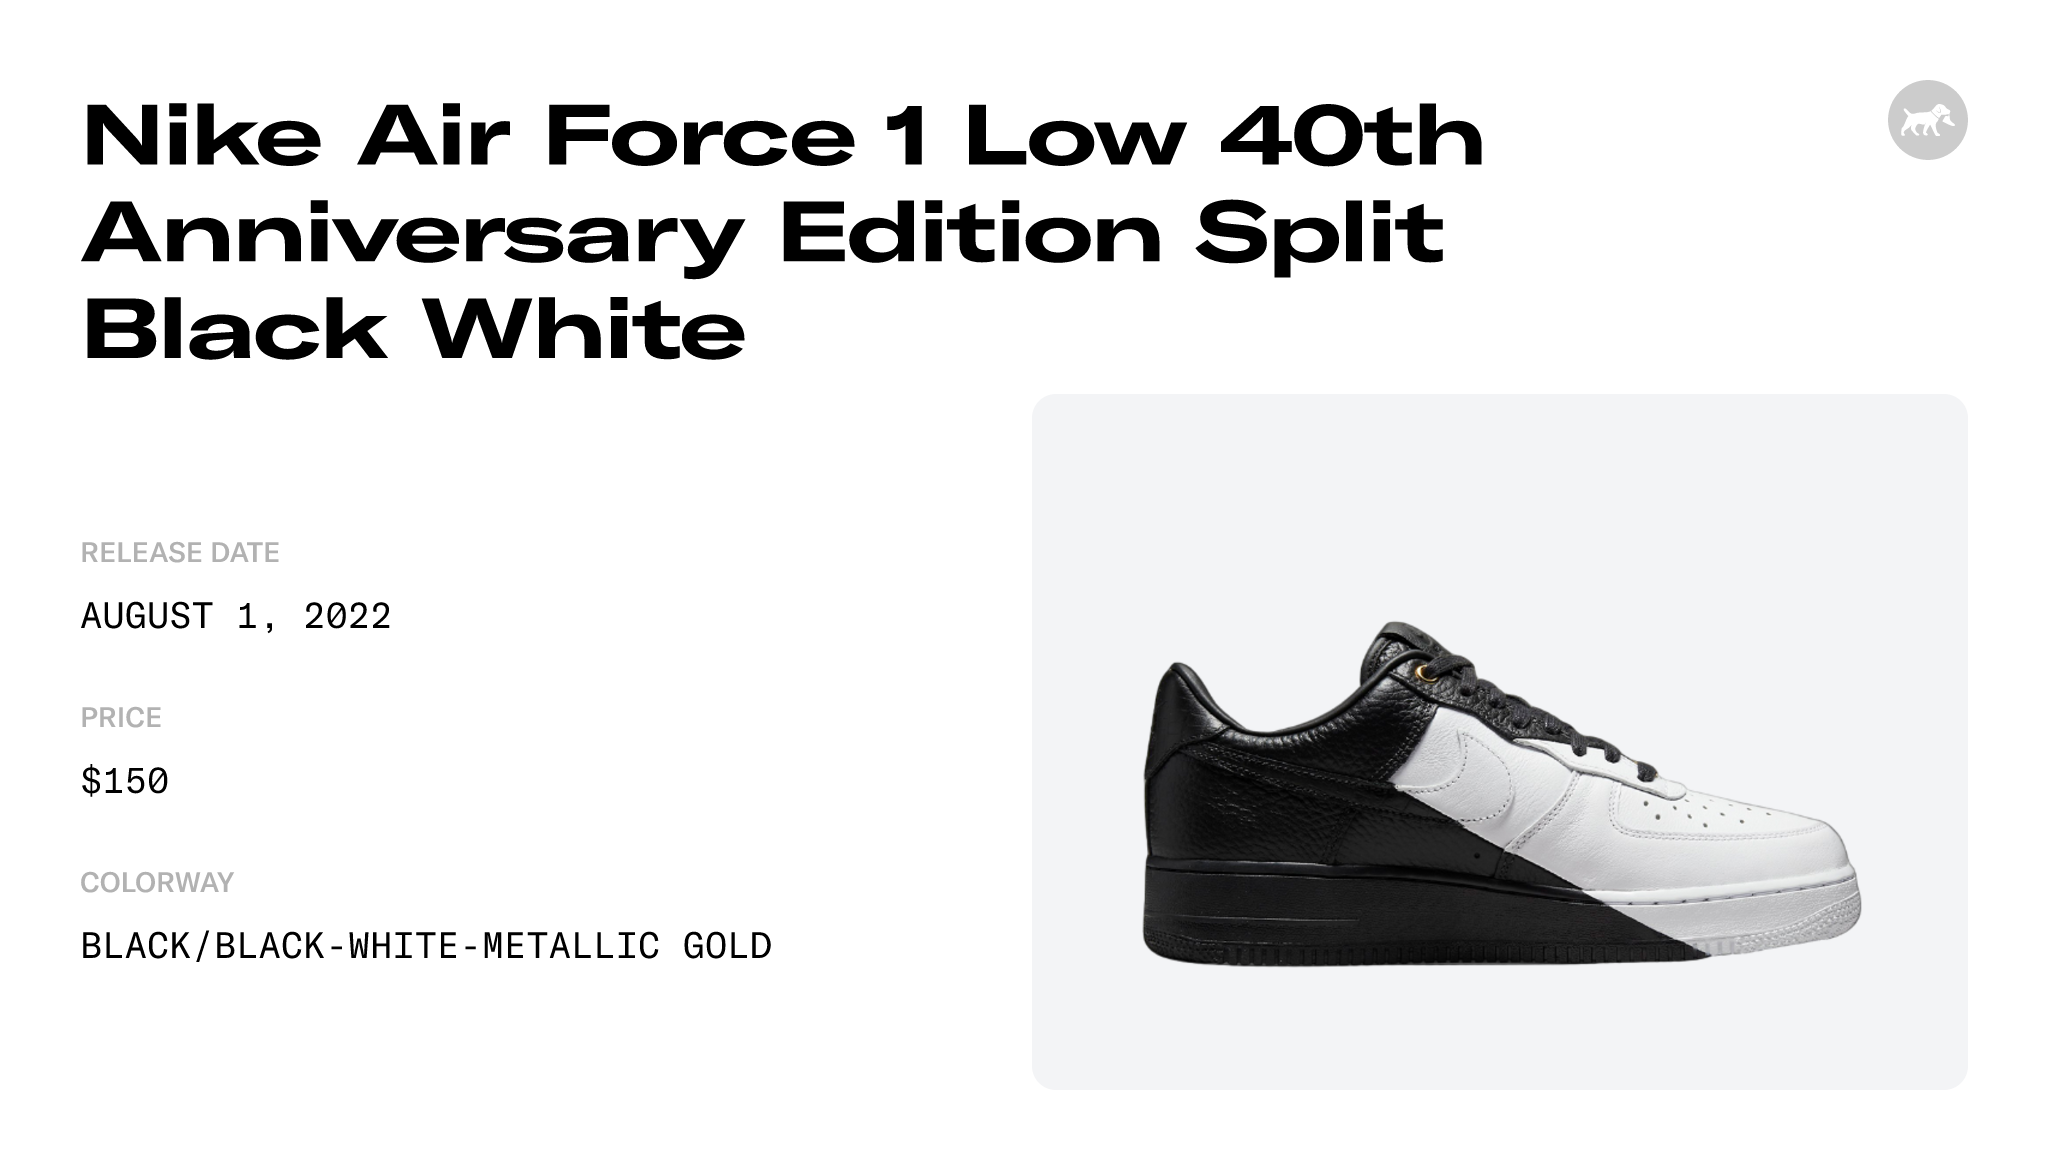 Nike Air Force 1 Shadow Black Bow (W) Raffles and Release Date